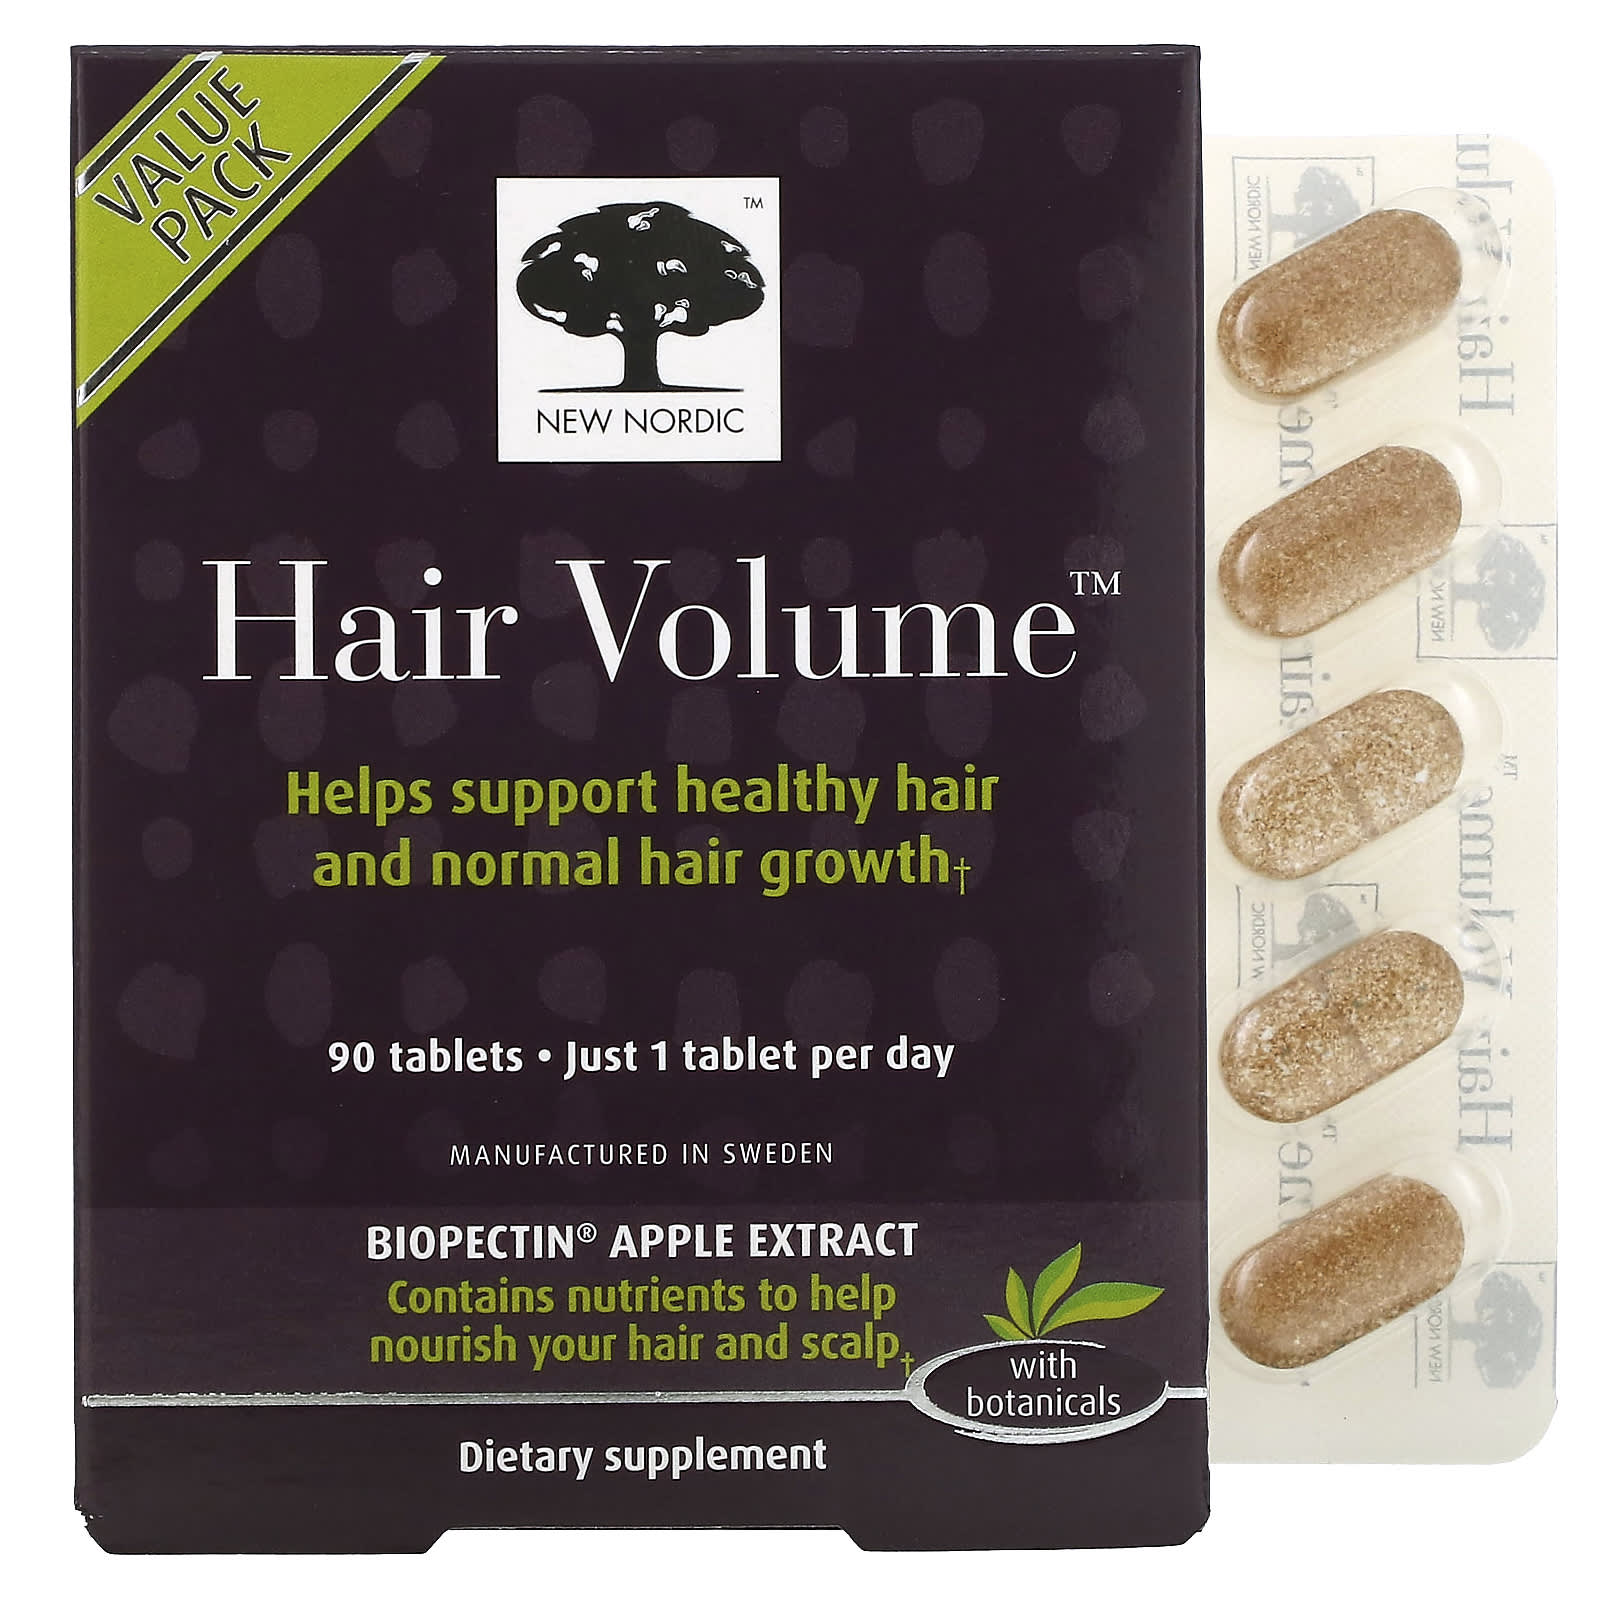 New Nordic US Inc, Hair Volume with Botanicals, 90 Tablets